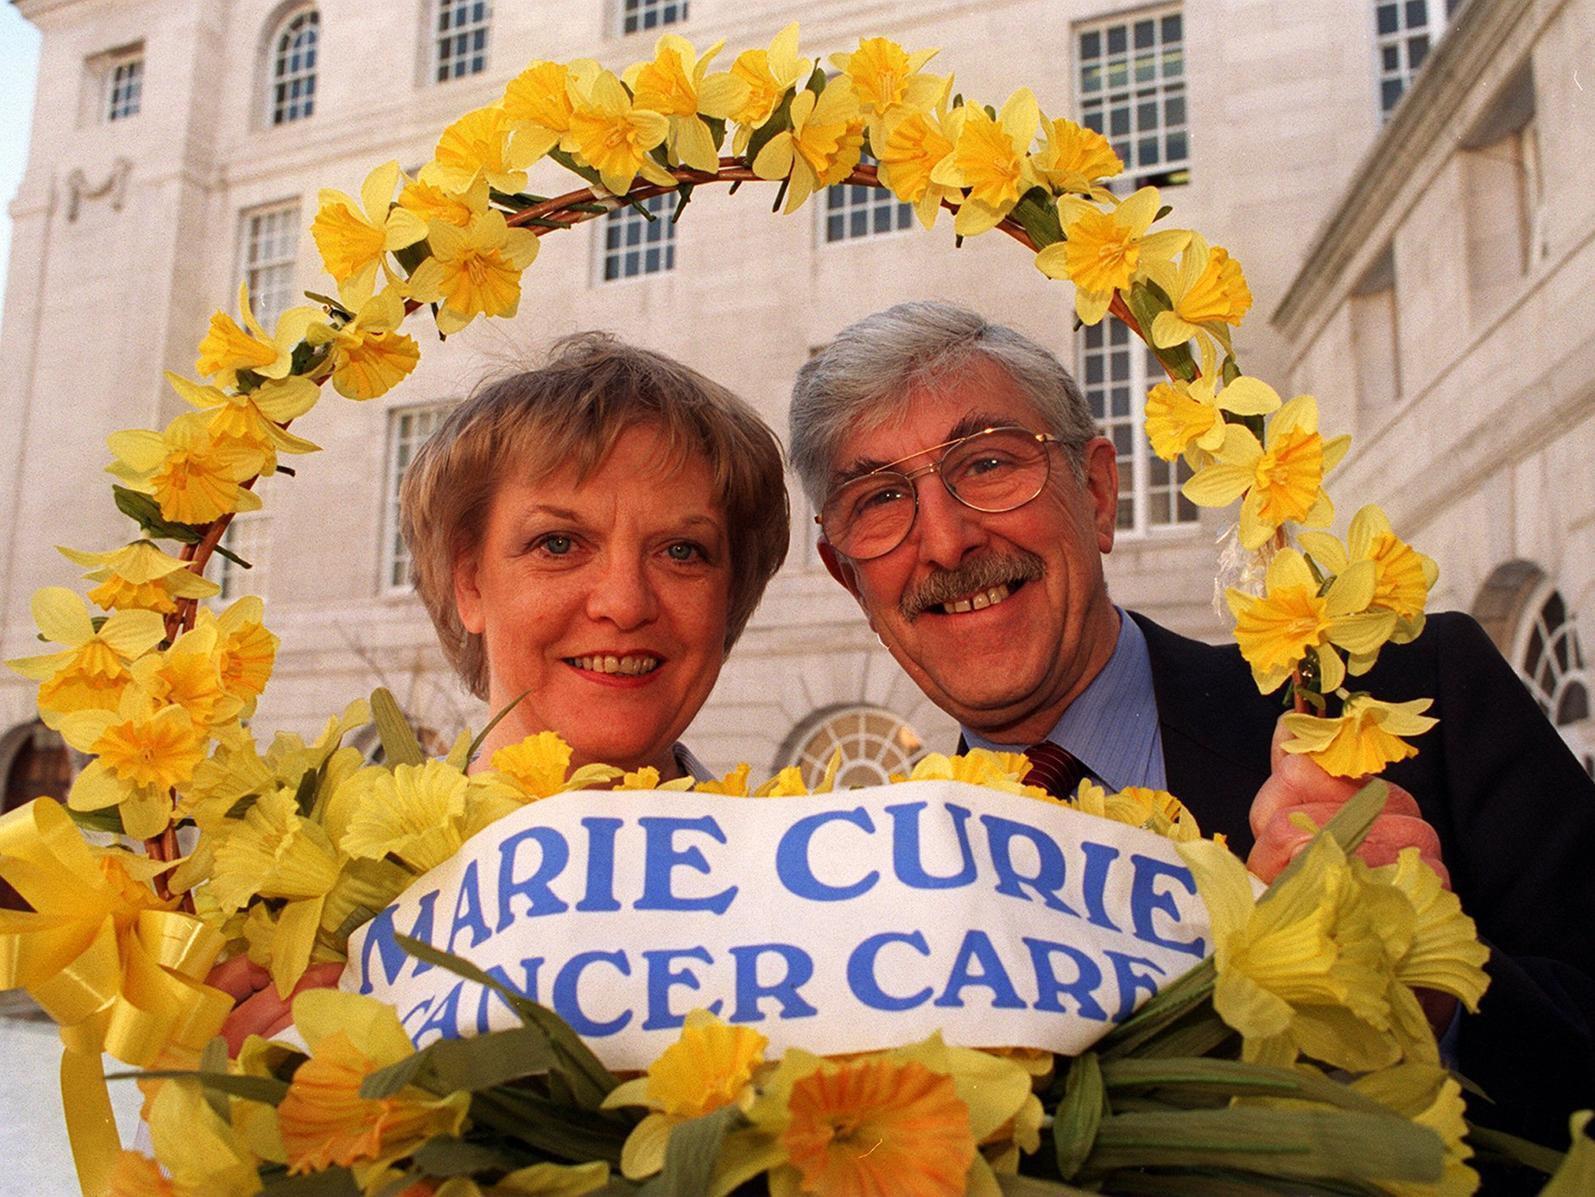 The new leader of Leeds City Council, Coun. Brian Walker, together with Marie Curie Cancer Care nurse, Irene Greaves launches the 1996 Daffodil Day Appeal at Leeds Civic Hall in February 1996.